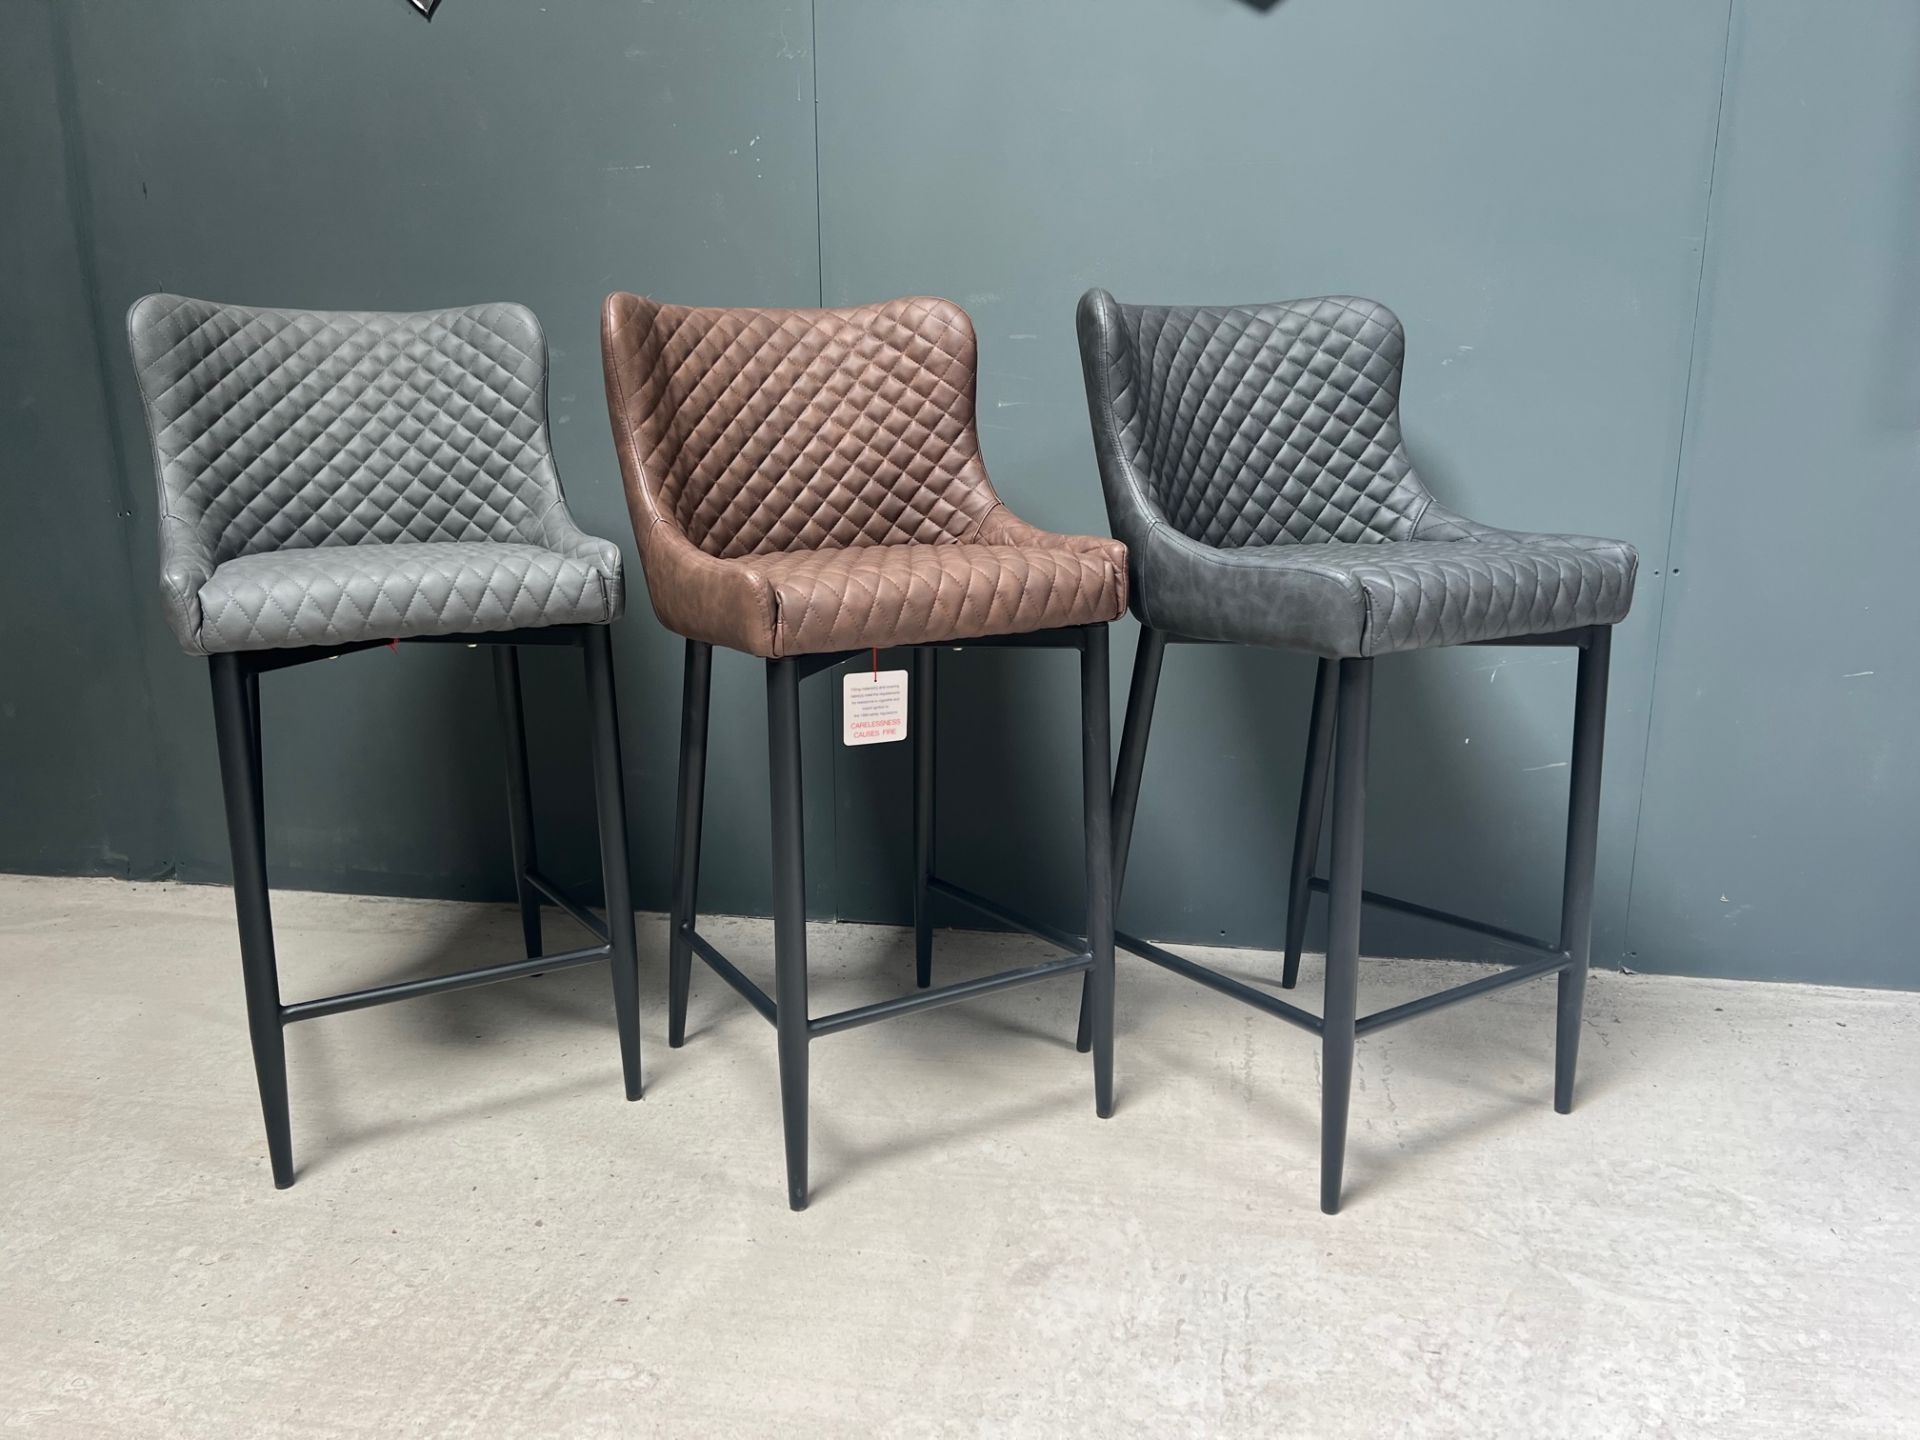 BOXED NEW PAIR OF CLASSIC PU LEATHER HIGH BAR STOOLS IN CHARCOAL - Image 4 of 5